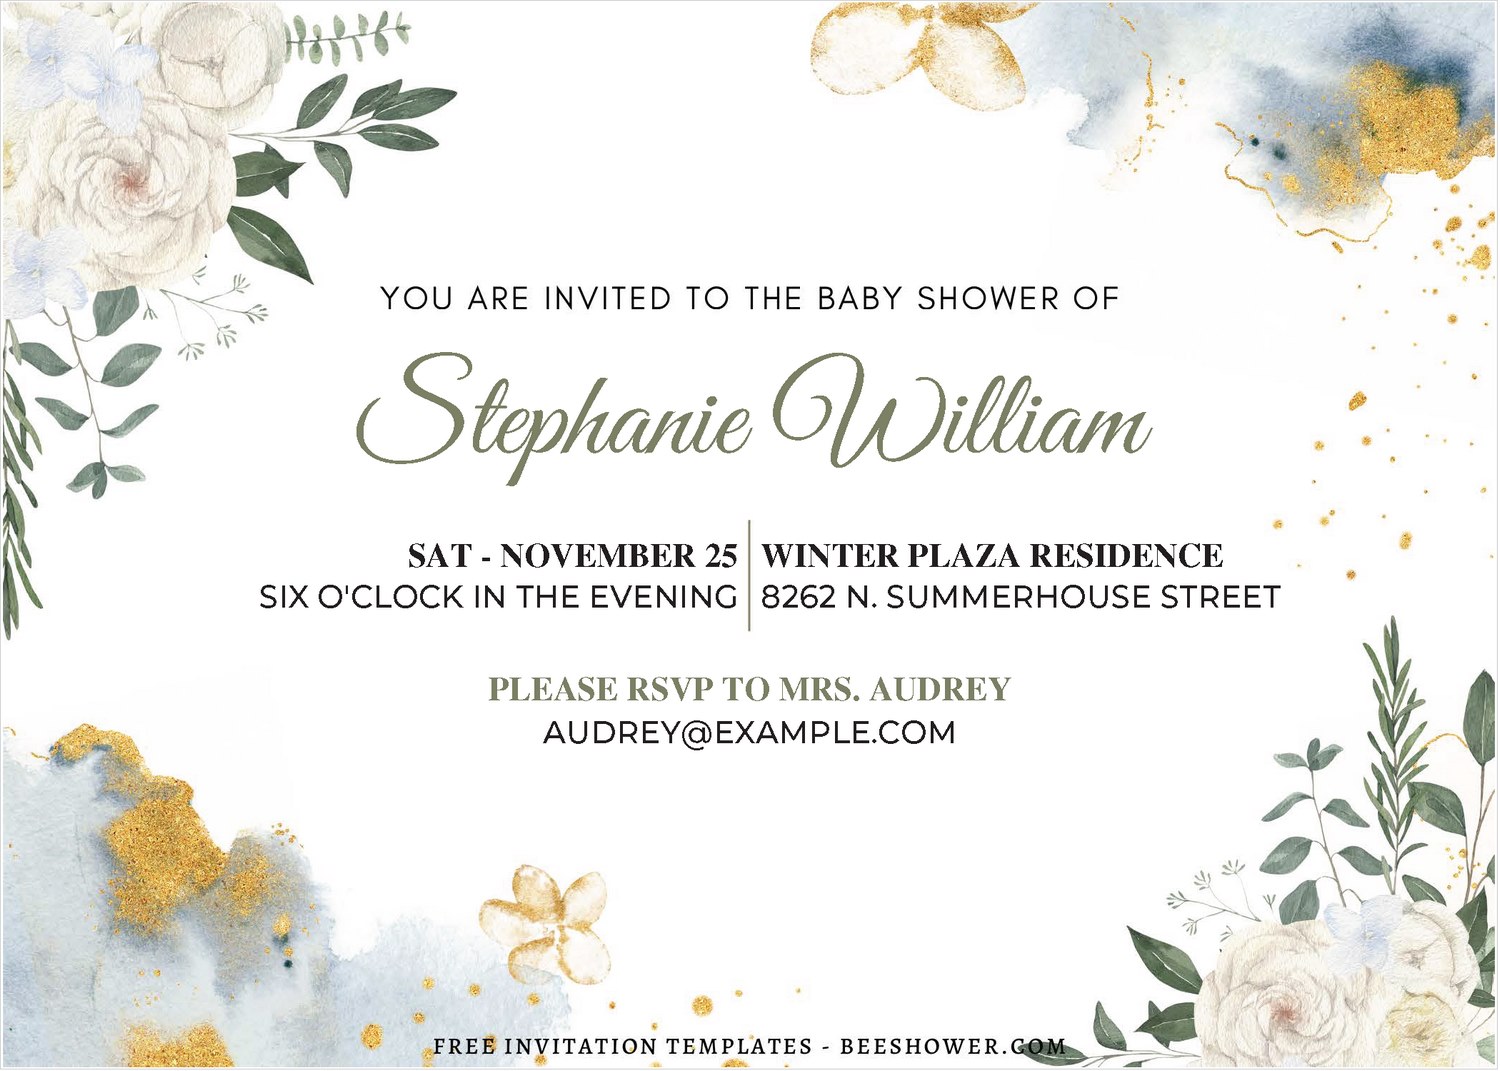 (Free Editable PDF) Dreamy Rustic Spring Baby Shower Invitation Templates A